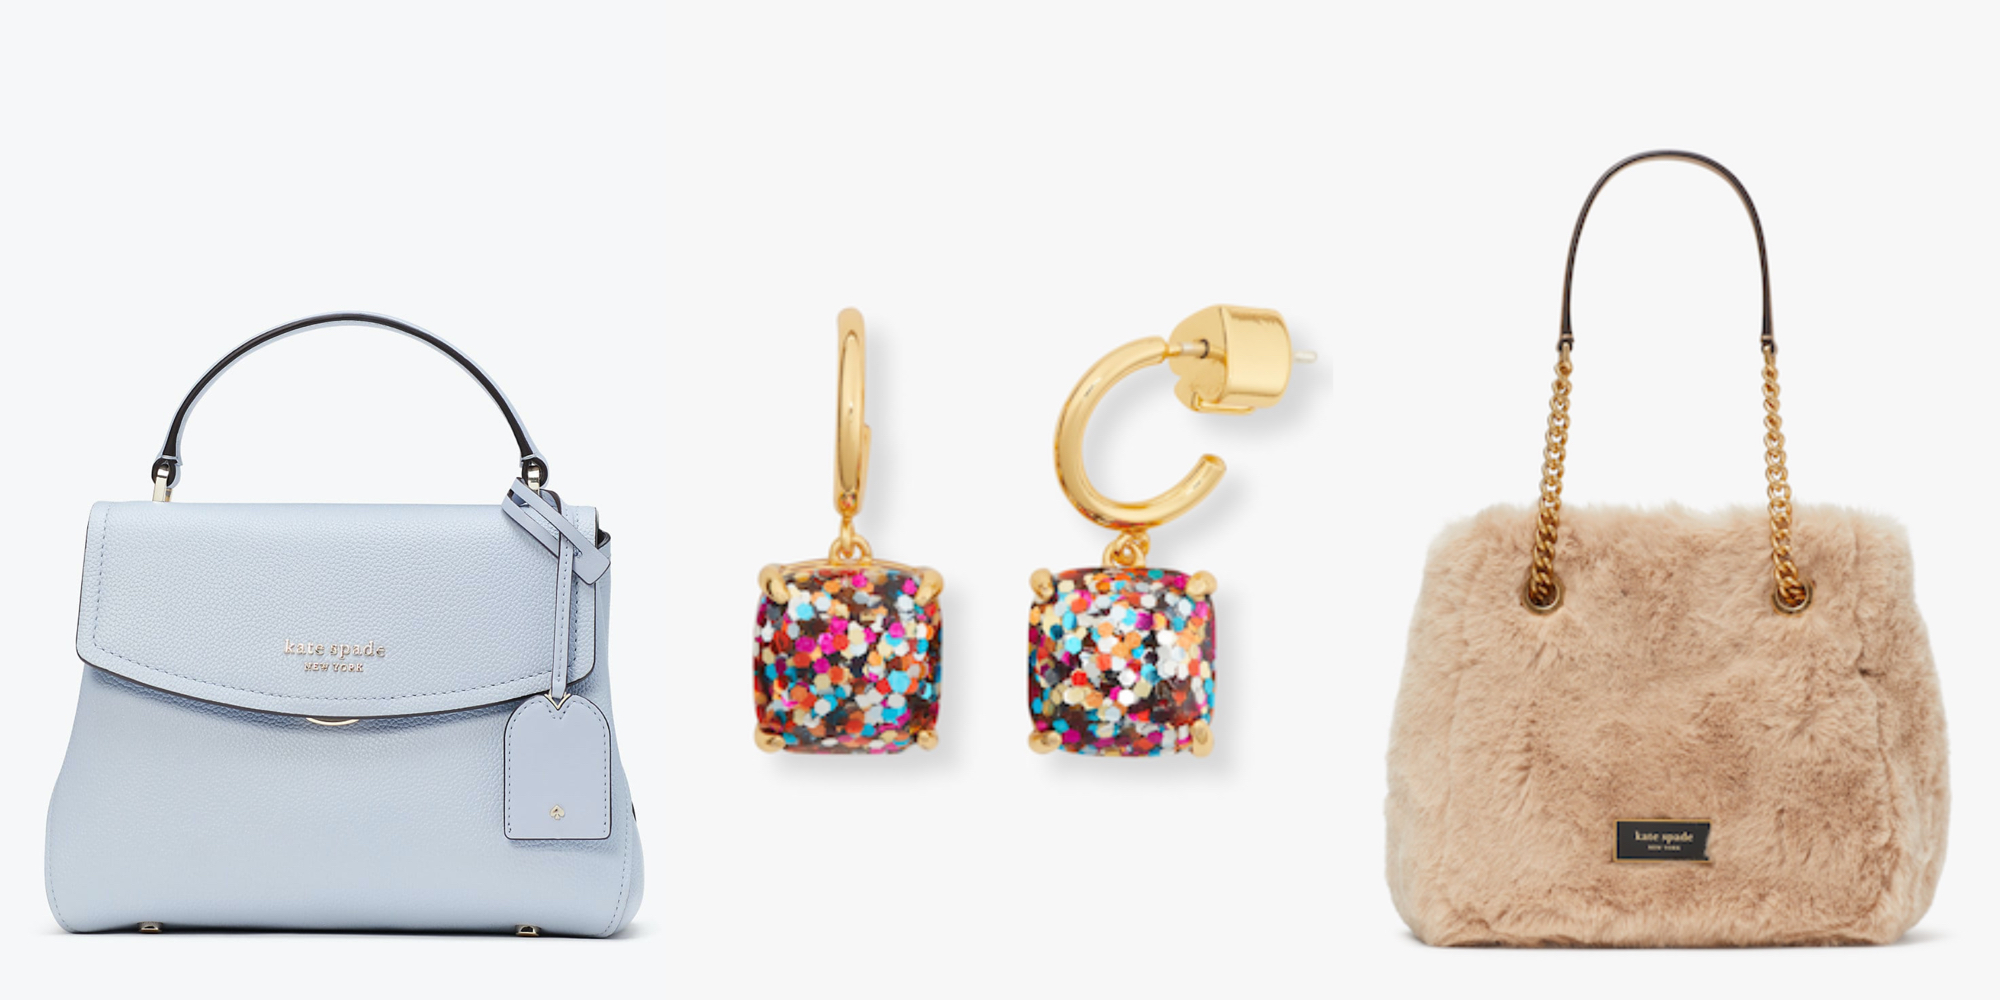 Kate Spade invites customers into the metaverse to buy its newest bags